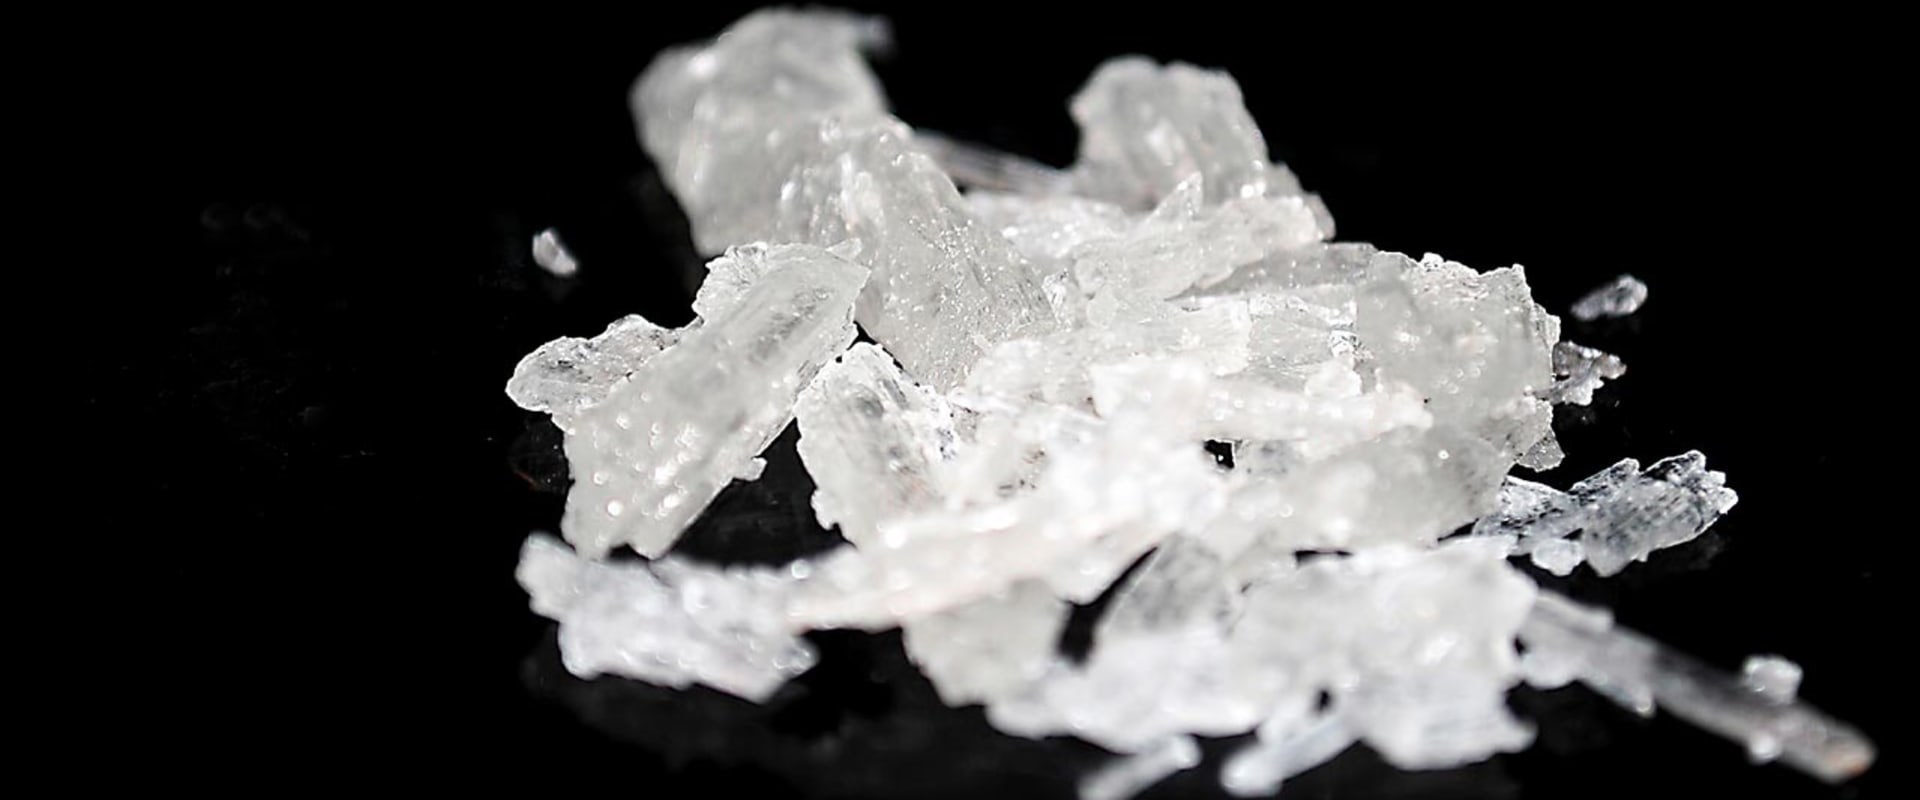 The History of Crystal Meth: From 19th Century Japan to the Present Day